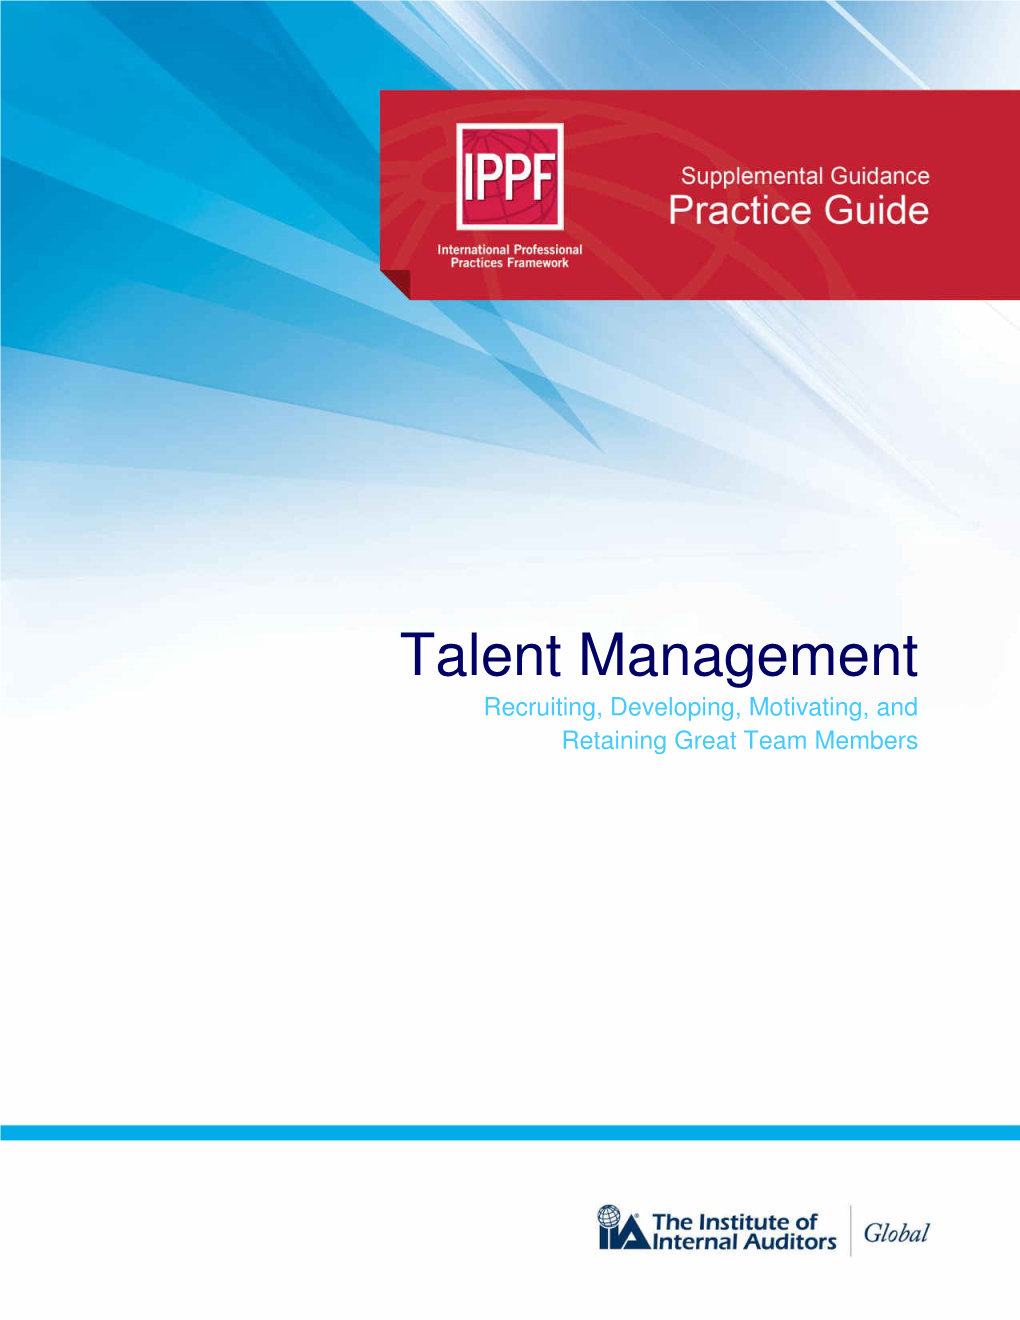 Talent Management Recruiting, Developing, Motivating, and Retaining Great Team Members